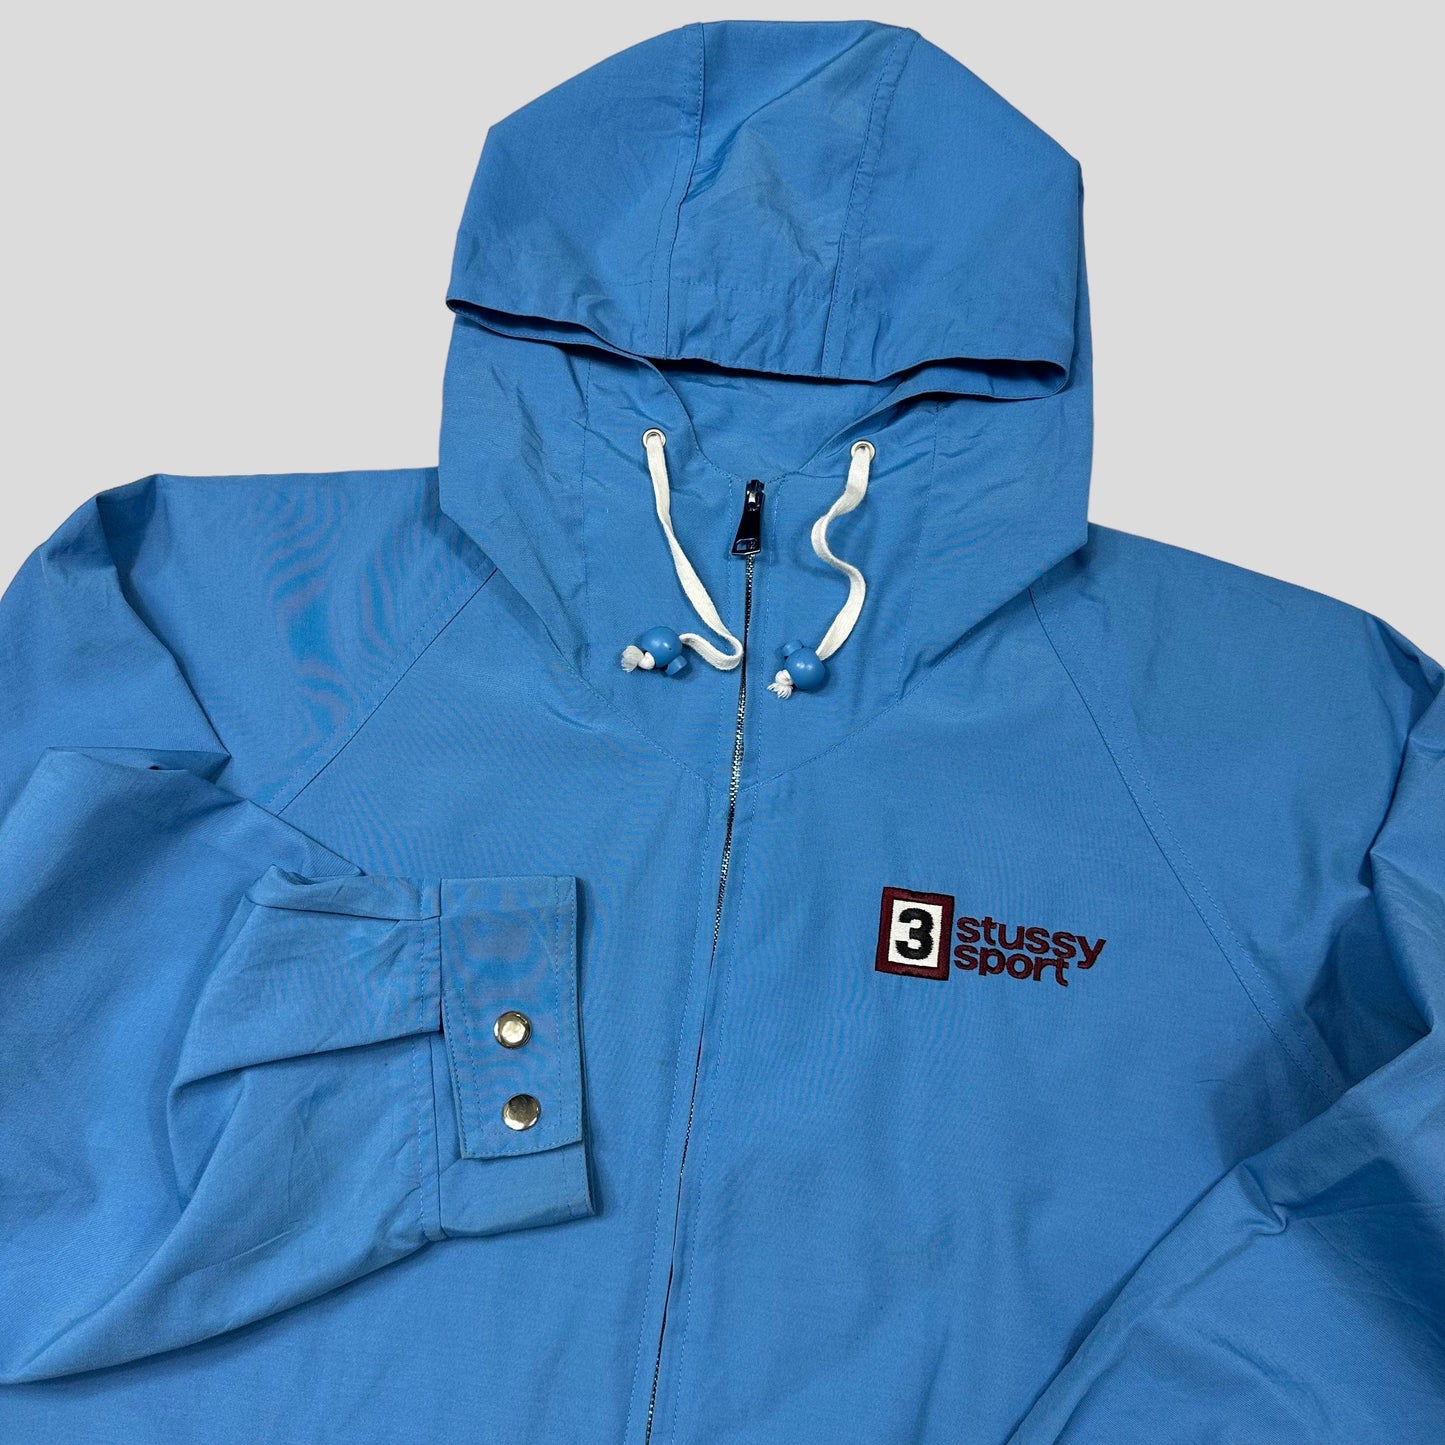 Stussy Sport 90’s Co-poly Sailing Jacket - XL - Known Source